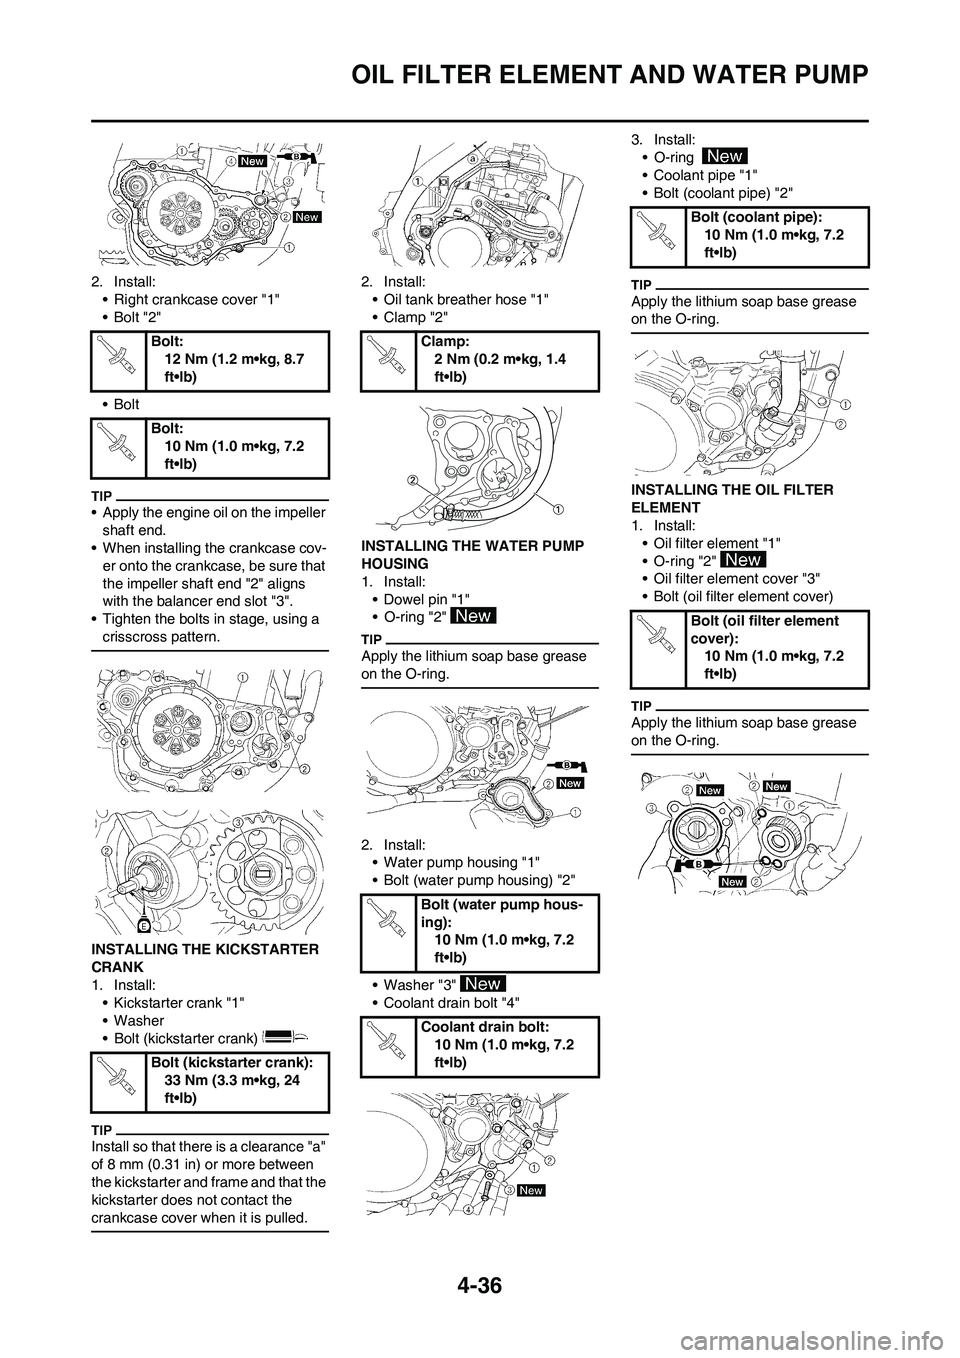 YAMAHA YZ450F 2009  Owners Manual 4-36
OIL FILTER ELEMENT AND WATER PUMP
2. Install:
• Right crankcase cover "1"
•Bolt "2"
•Bolt
• Apply the engine oil on the impeller 
shaft end.
• When installing the crankcase cov-
er onto